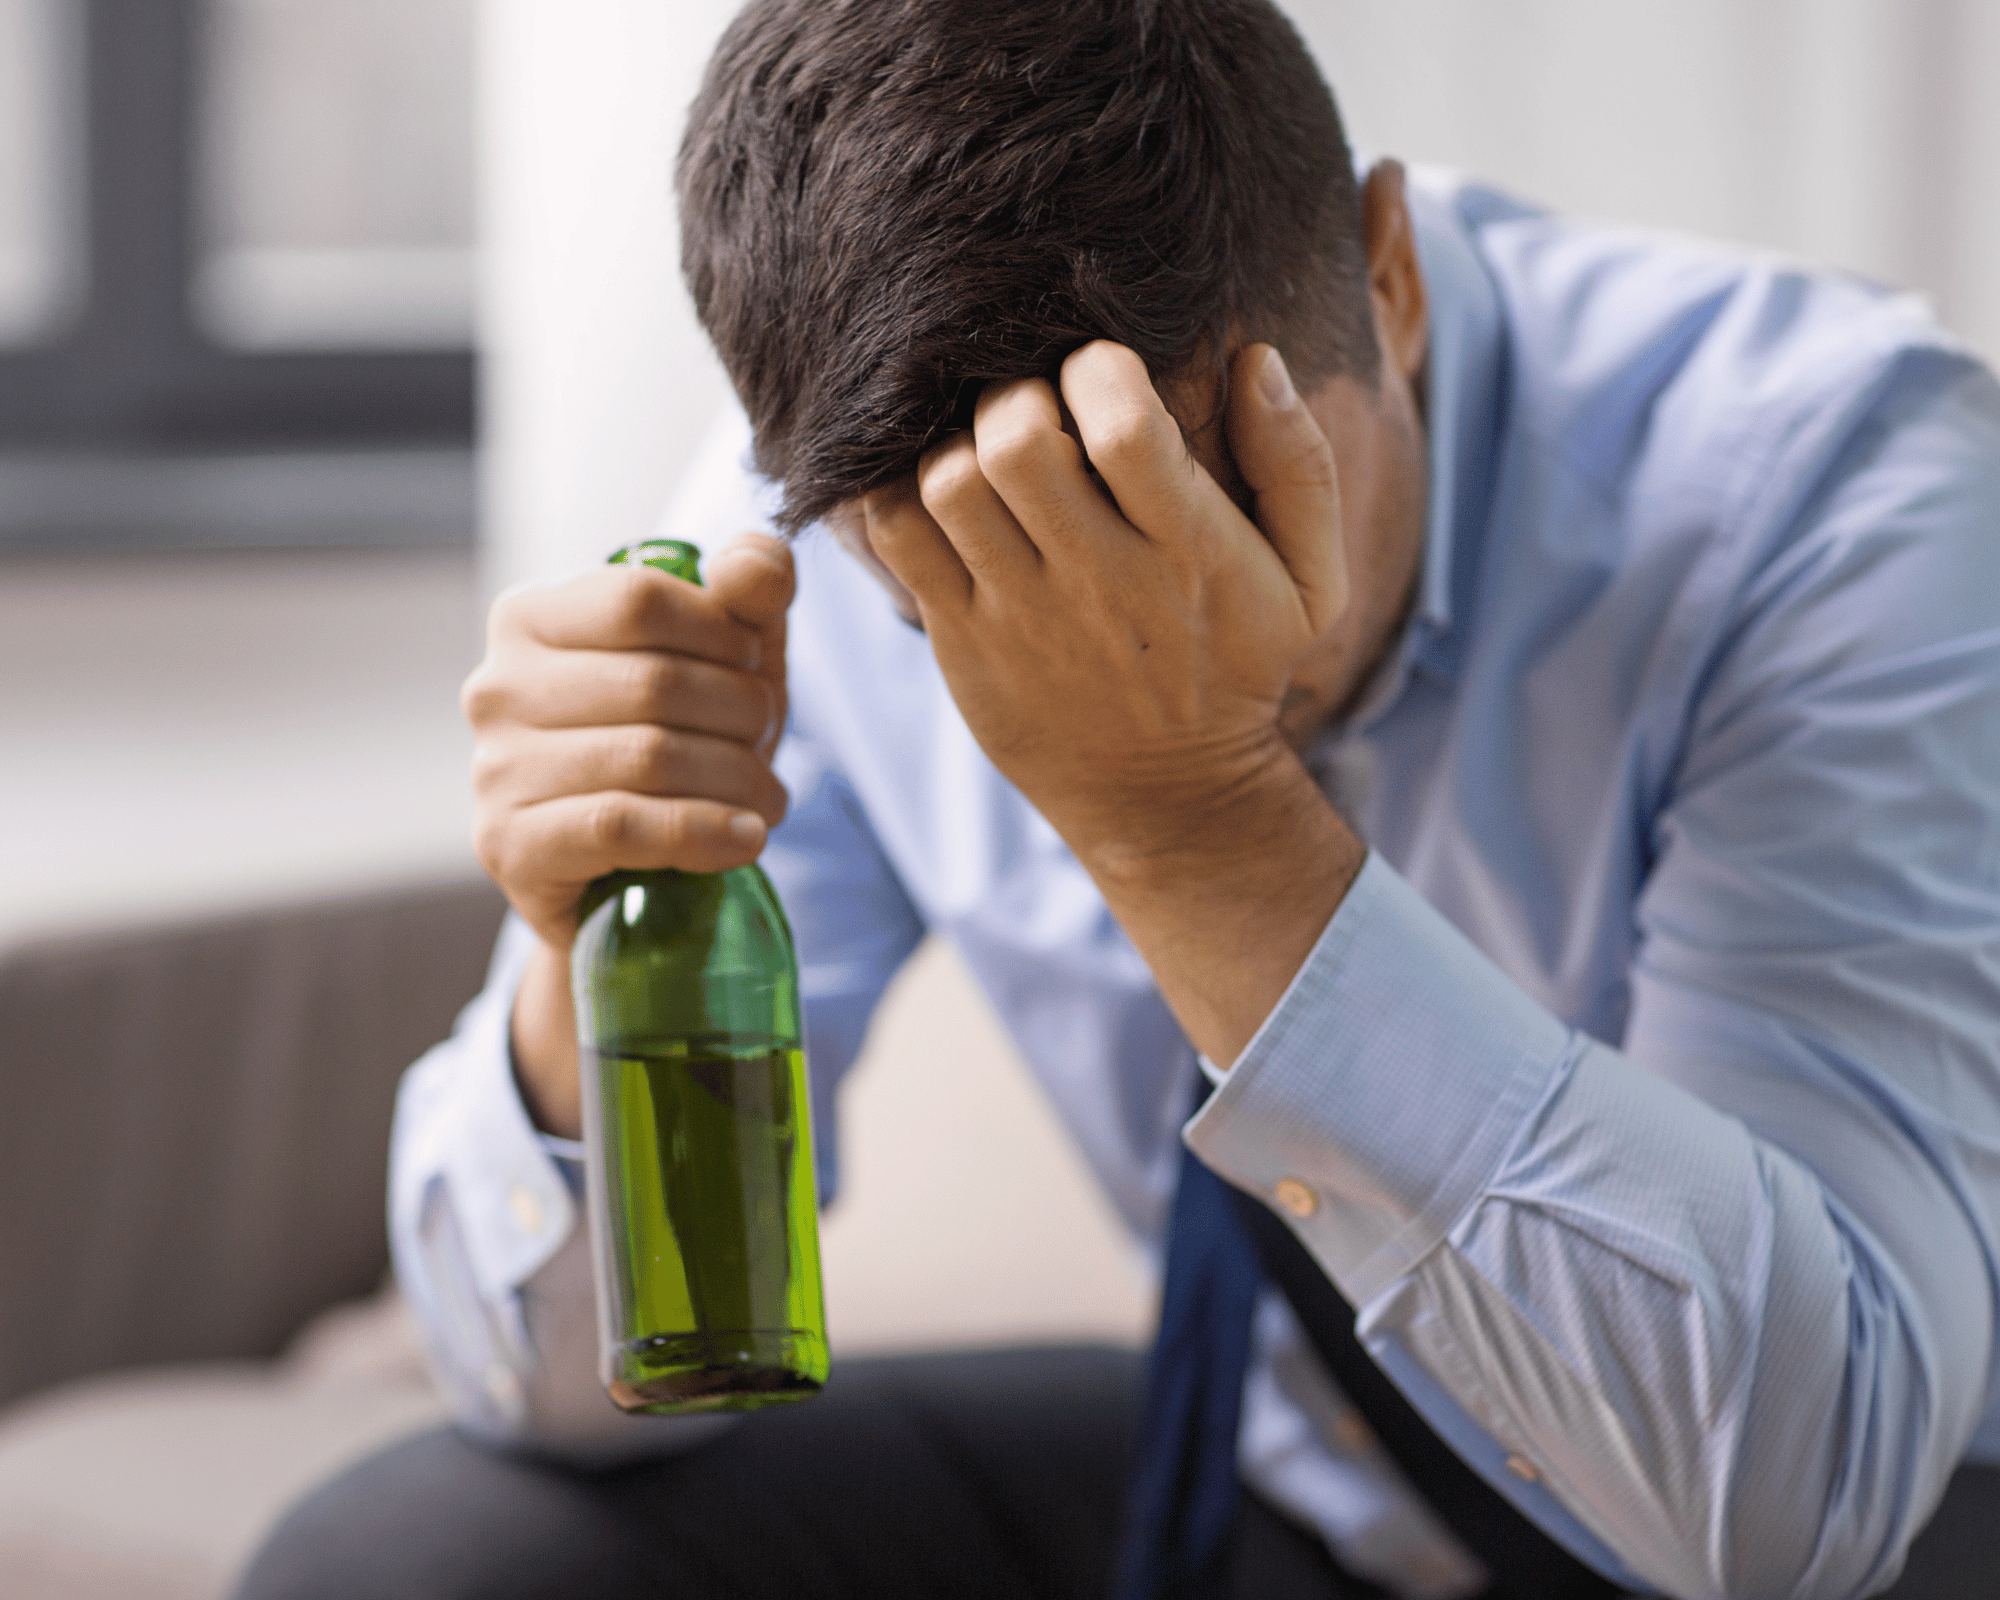 5 Telltale Signs a Recovering Alcoholic Has Started Drinking Again